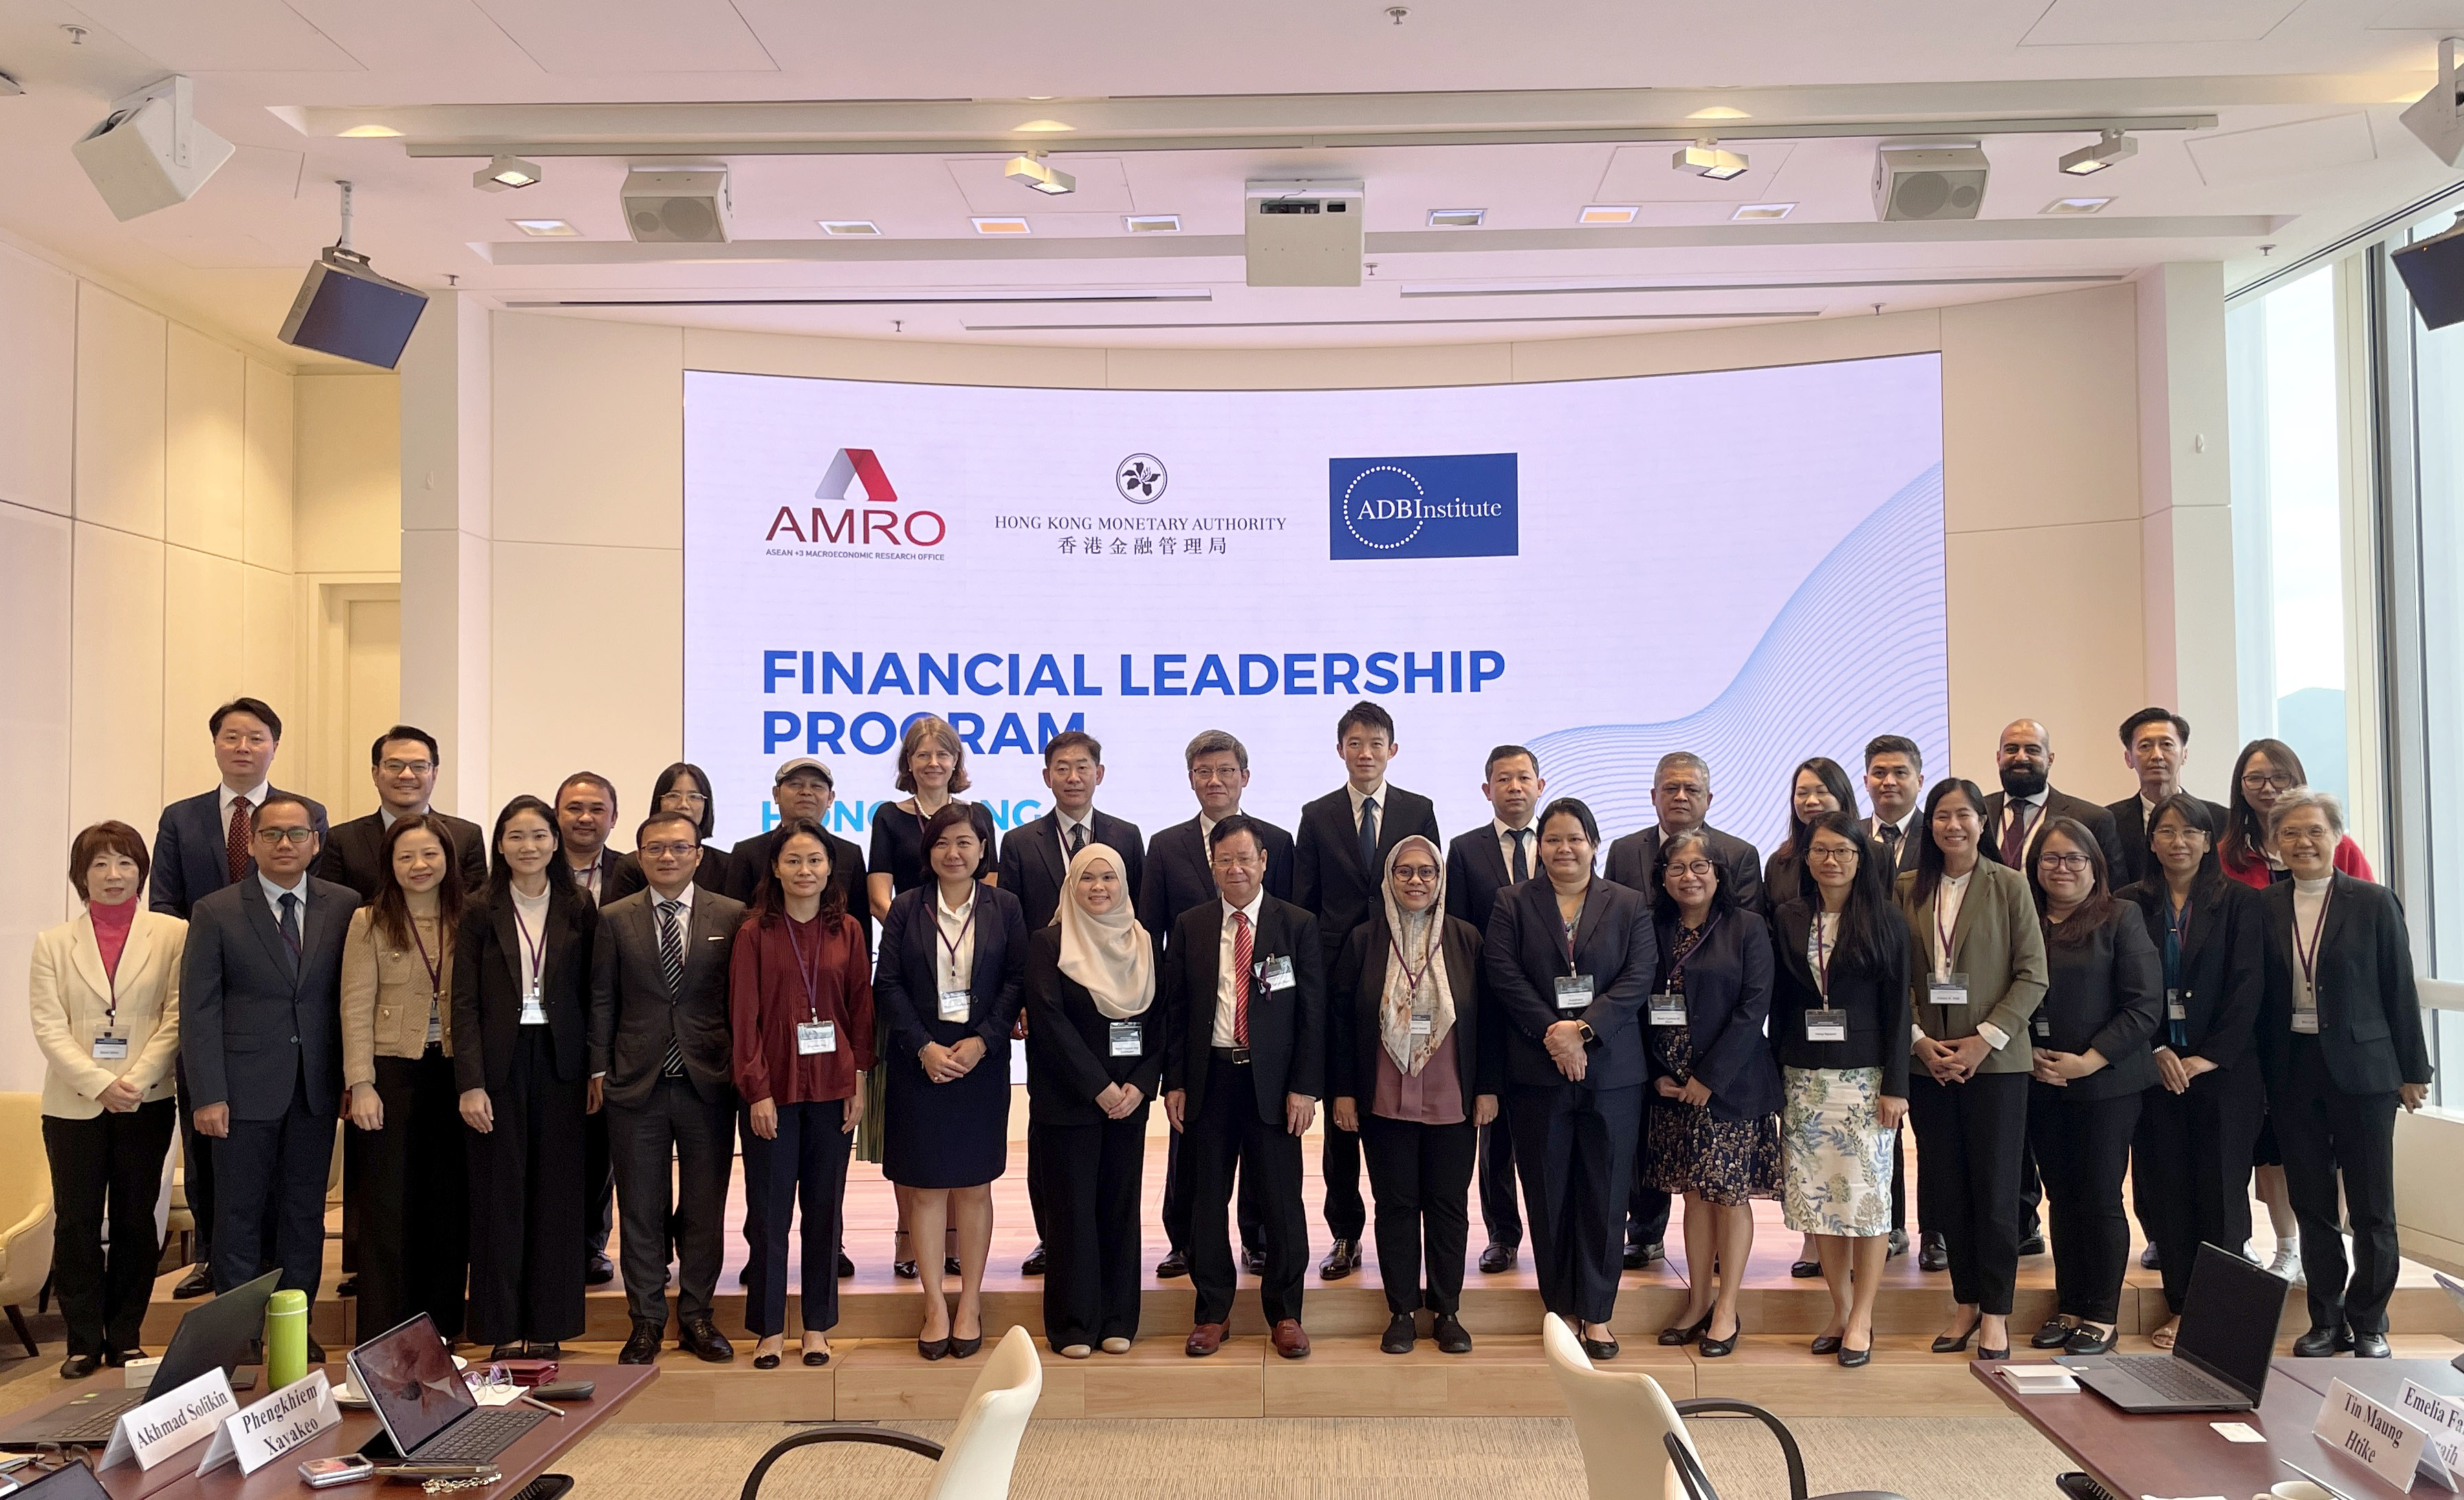 About 30 participants comprising senior representatives from central banks, ministries of finance and related government agencies of Brunei, Cambodia, Indonesia, Lao PDR, Malaysia, Myanmar, the Philippines, Singapore, Thailand and Vietnam attend the Financial Leadership Training Program.